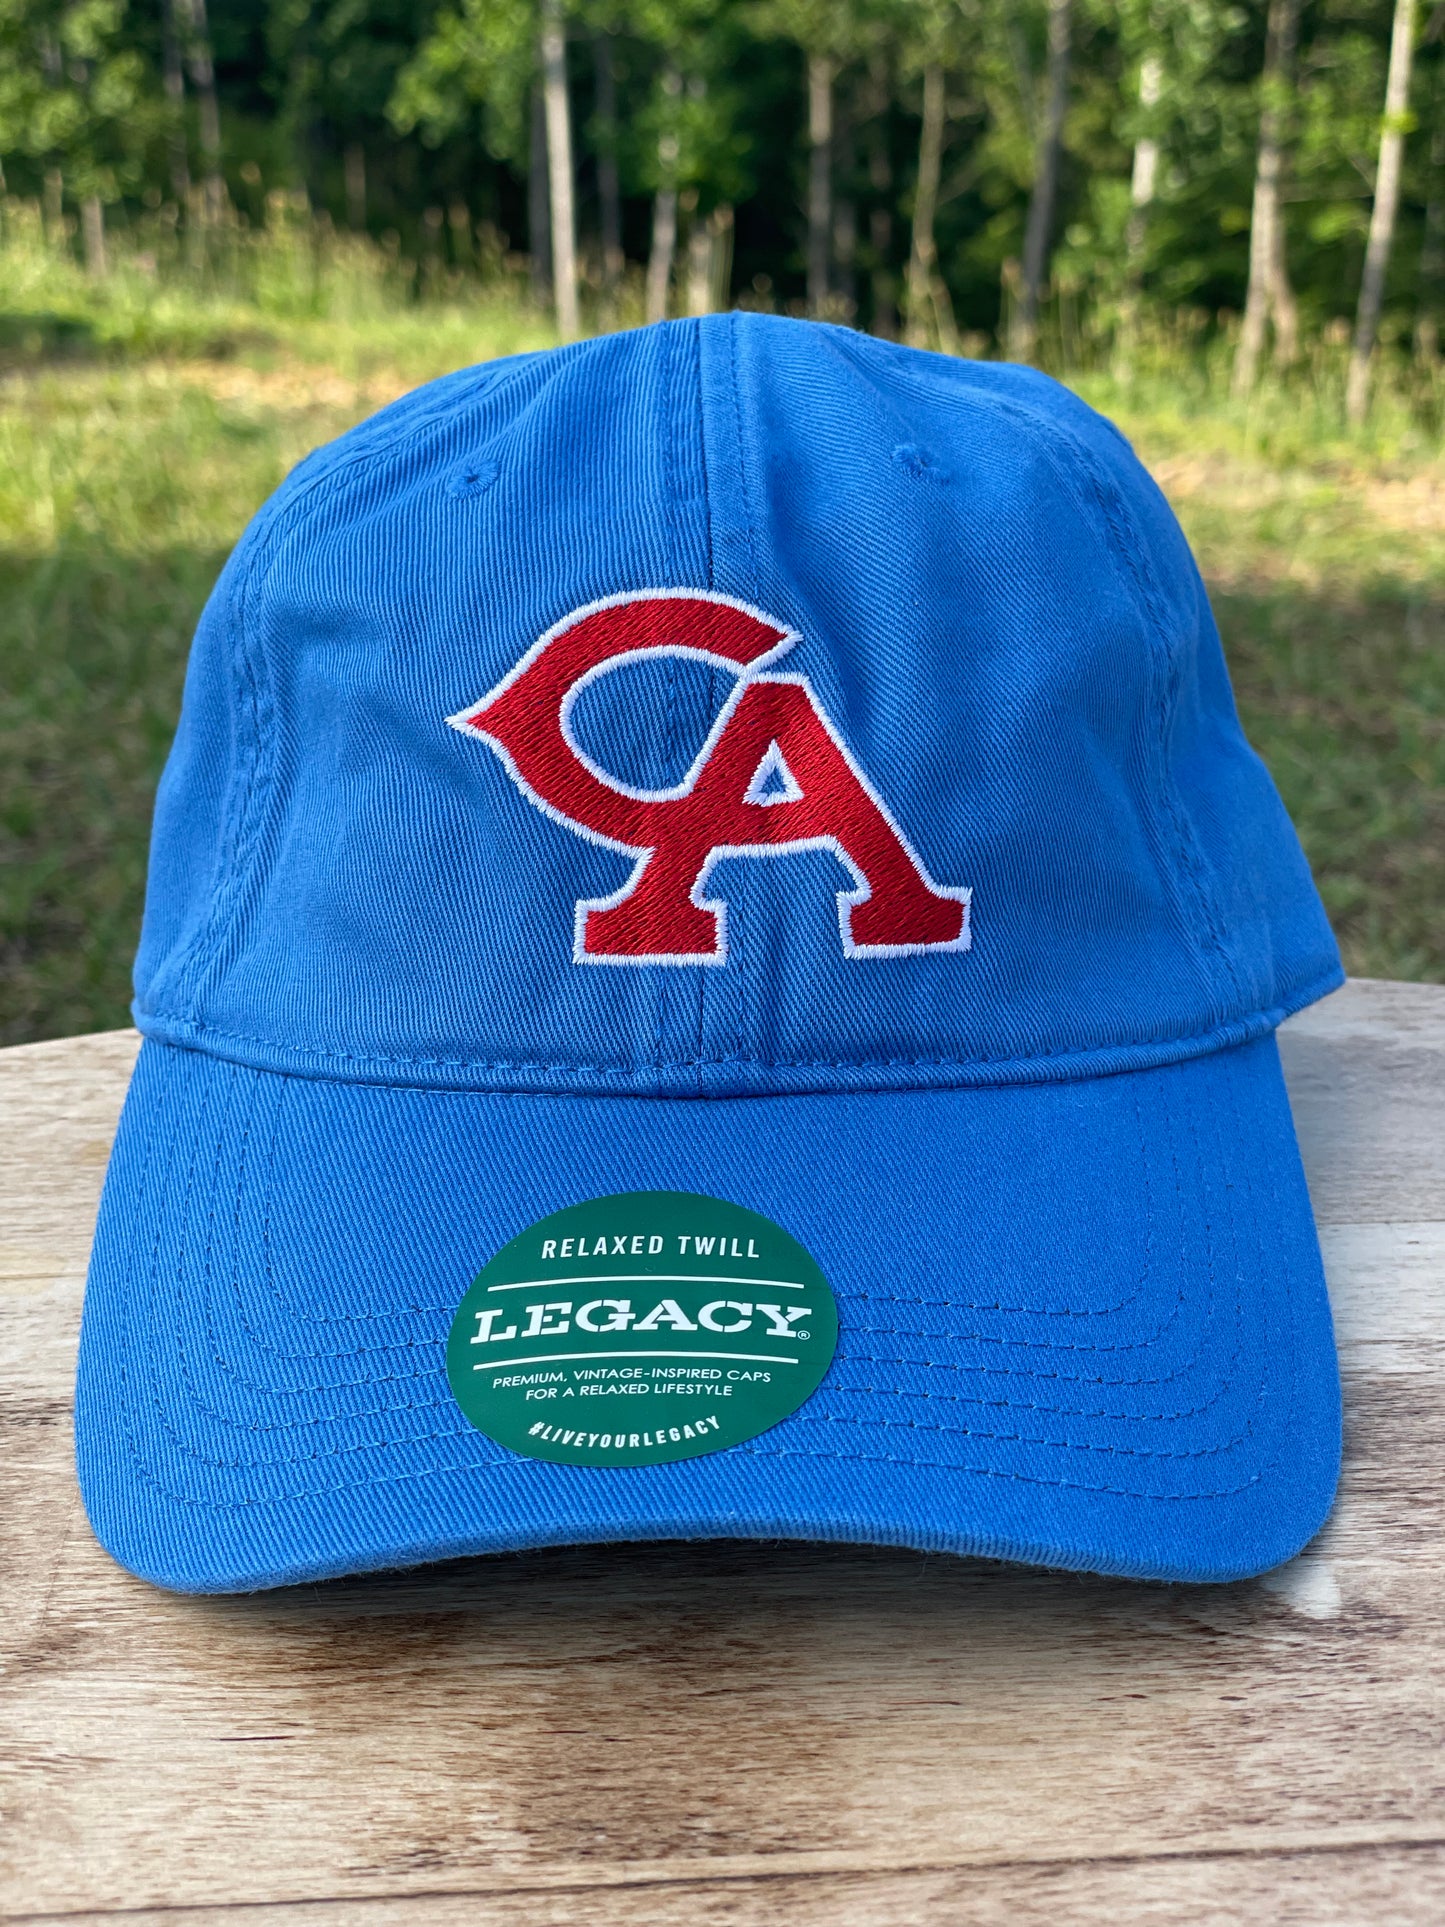 New Legacy Relaxed Twill Dad Hat